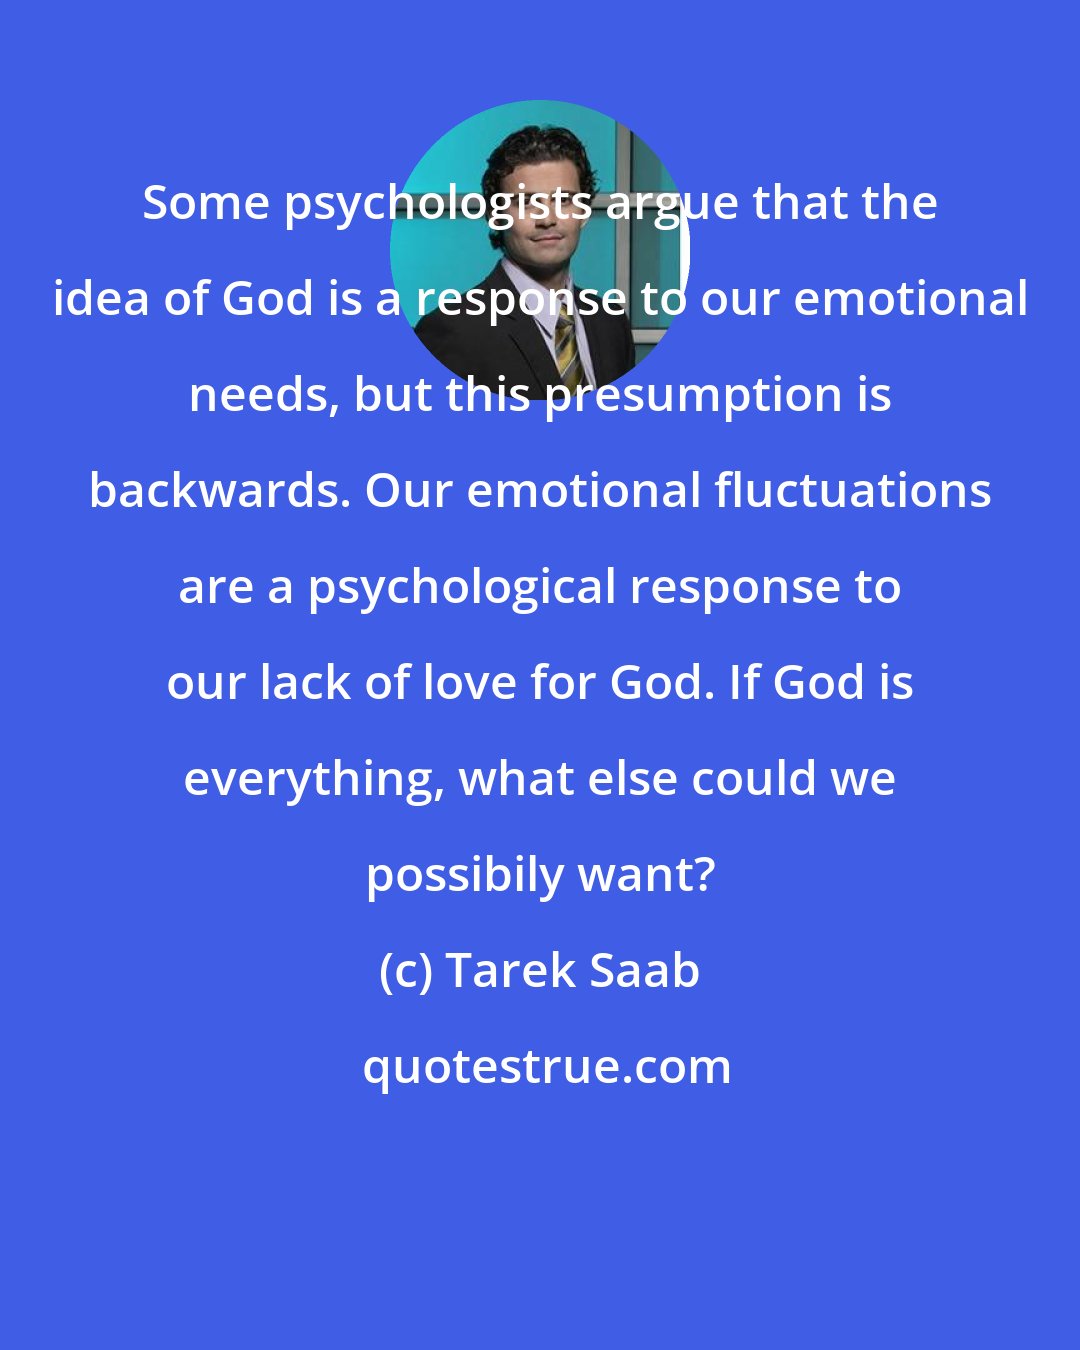 Tarek Saab: Some psychologists argue that the idea of God is a response to our emotional needs, but this presumption is backwards. Our emotional fluctuations are a psychological response to our lack of love for God. If God is everything, what else could we possibily want?